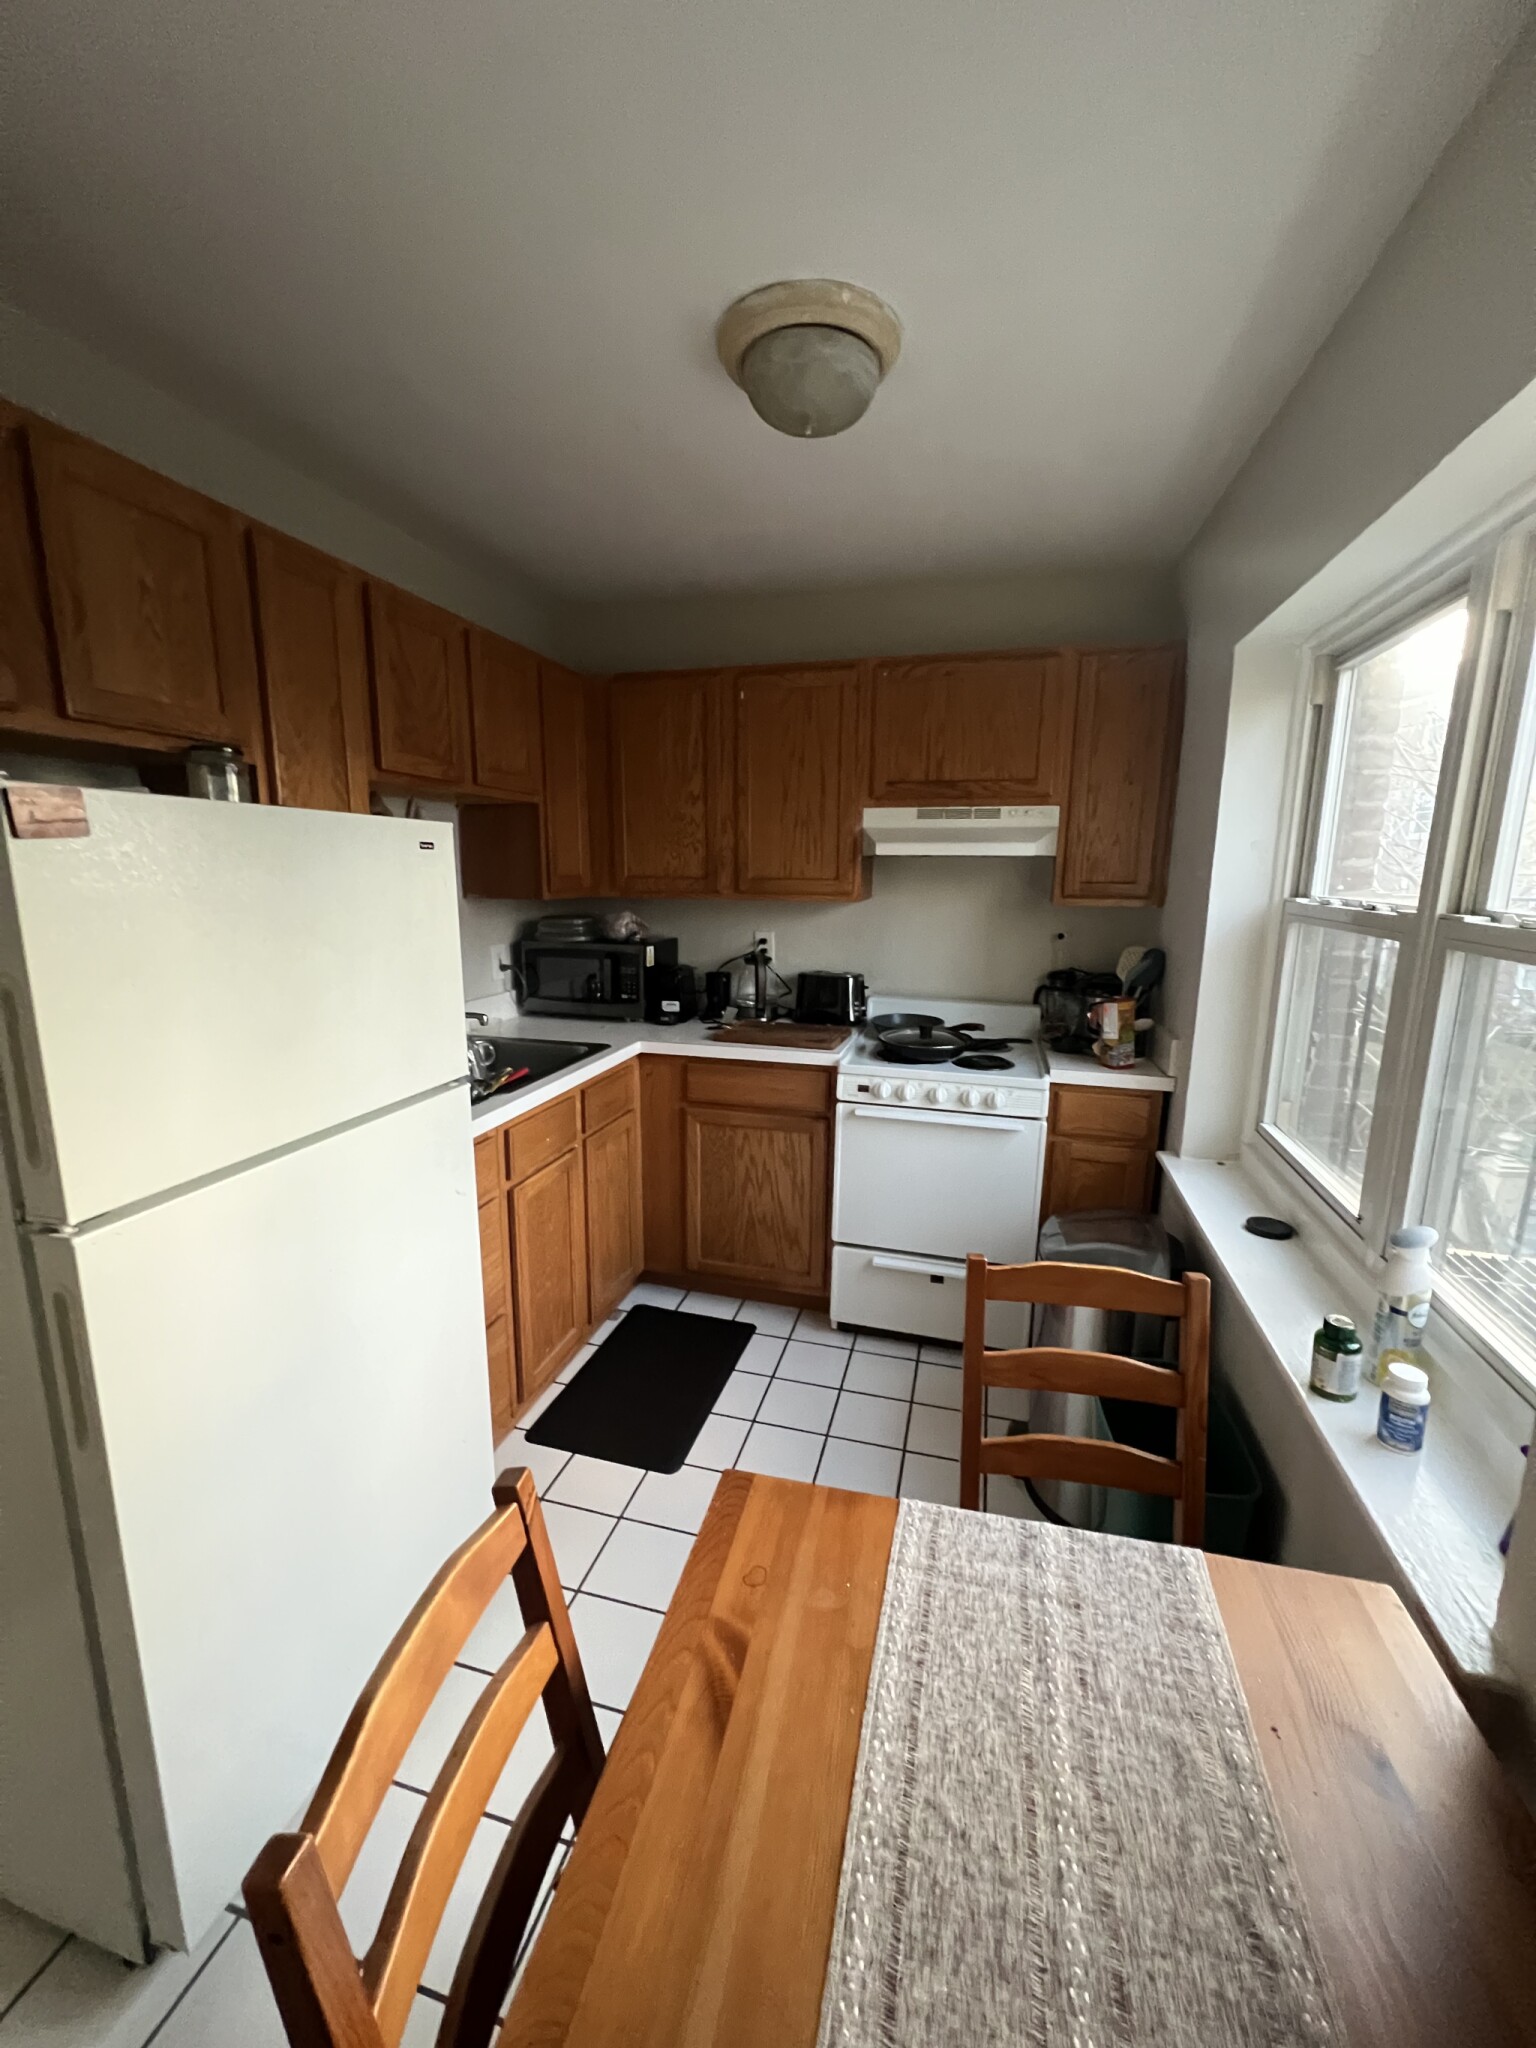 Photos of apartment on Guest St.,Boston MA 02135